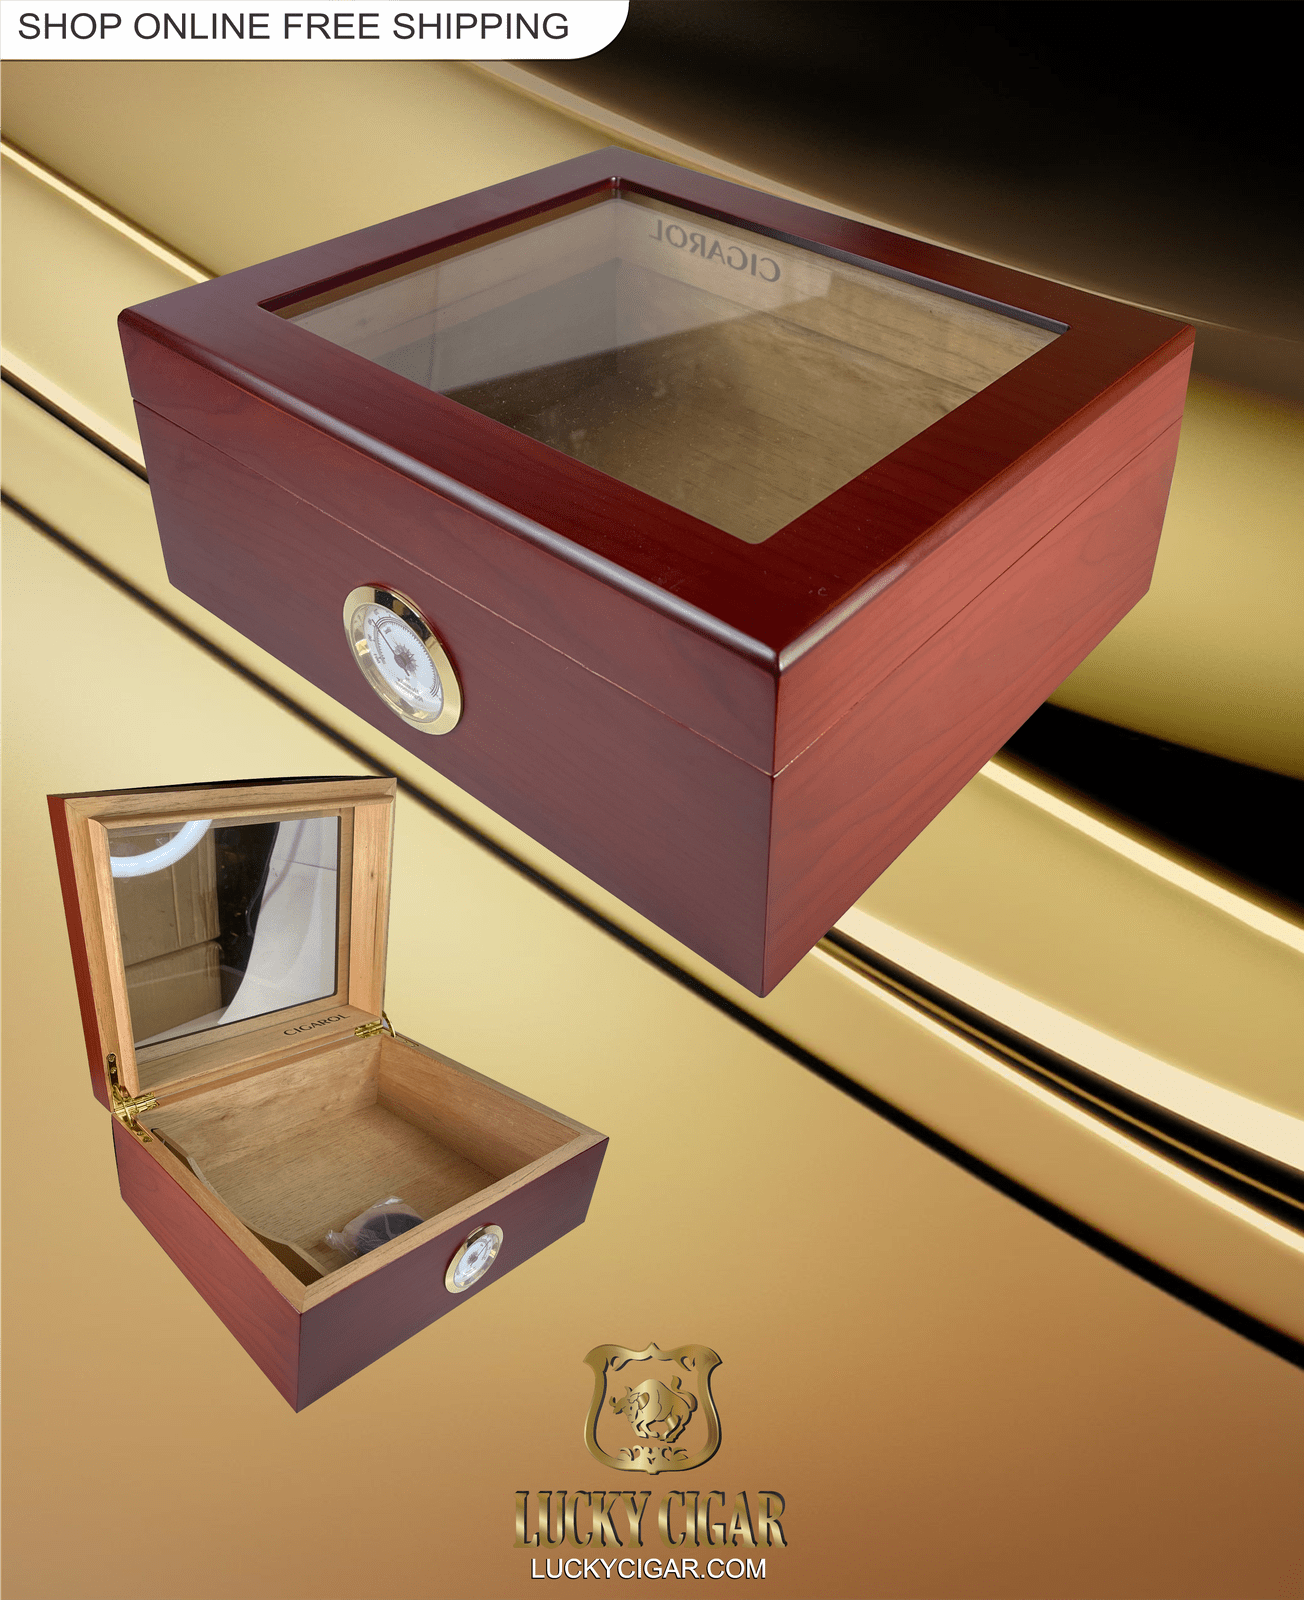 Cigar Lifestyle Accessories: Desk Humidor with Glass Top in Cherry Wood